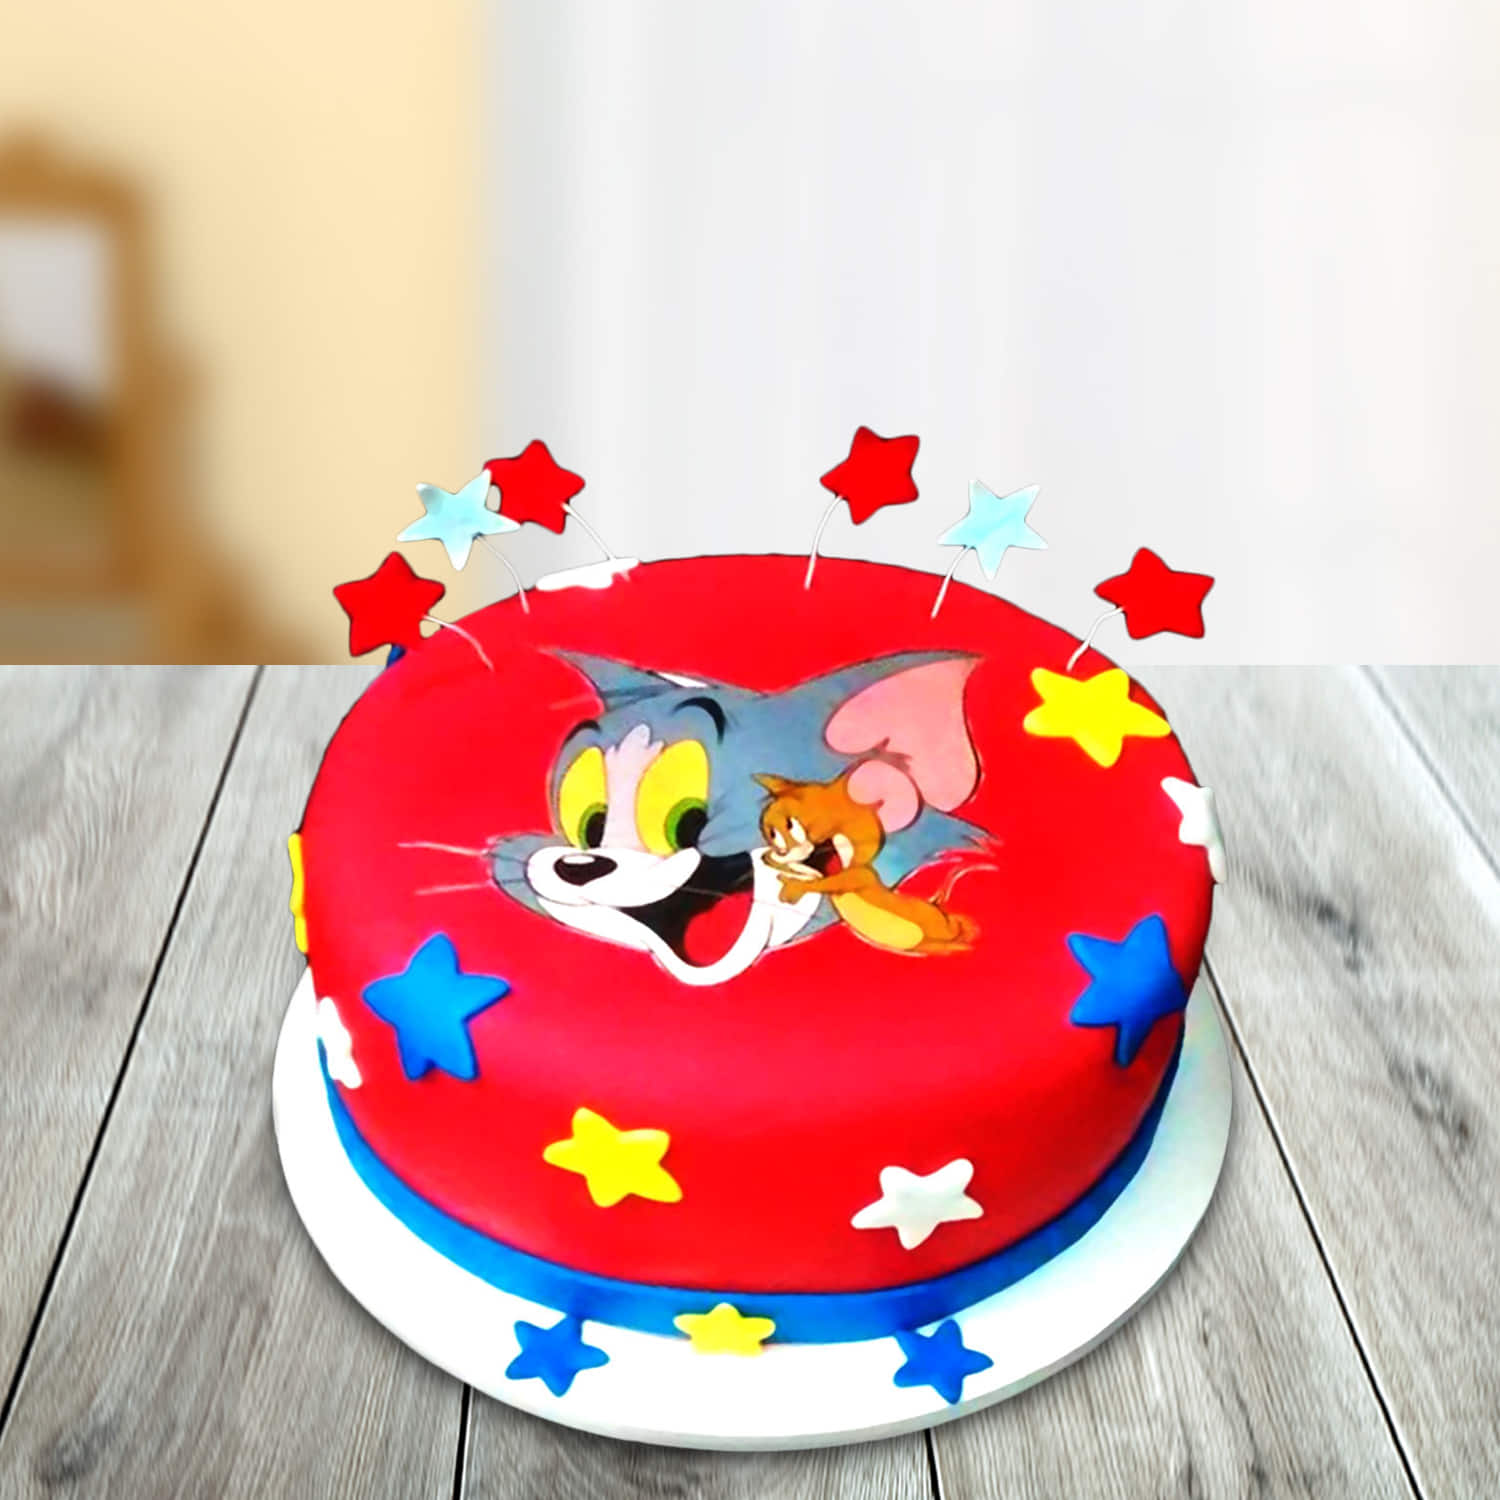 Occasions - ADORABLE TOM AND JERRY BIRTHDAY CAKE THAT... | Facebook